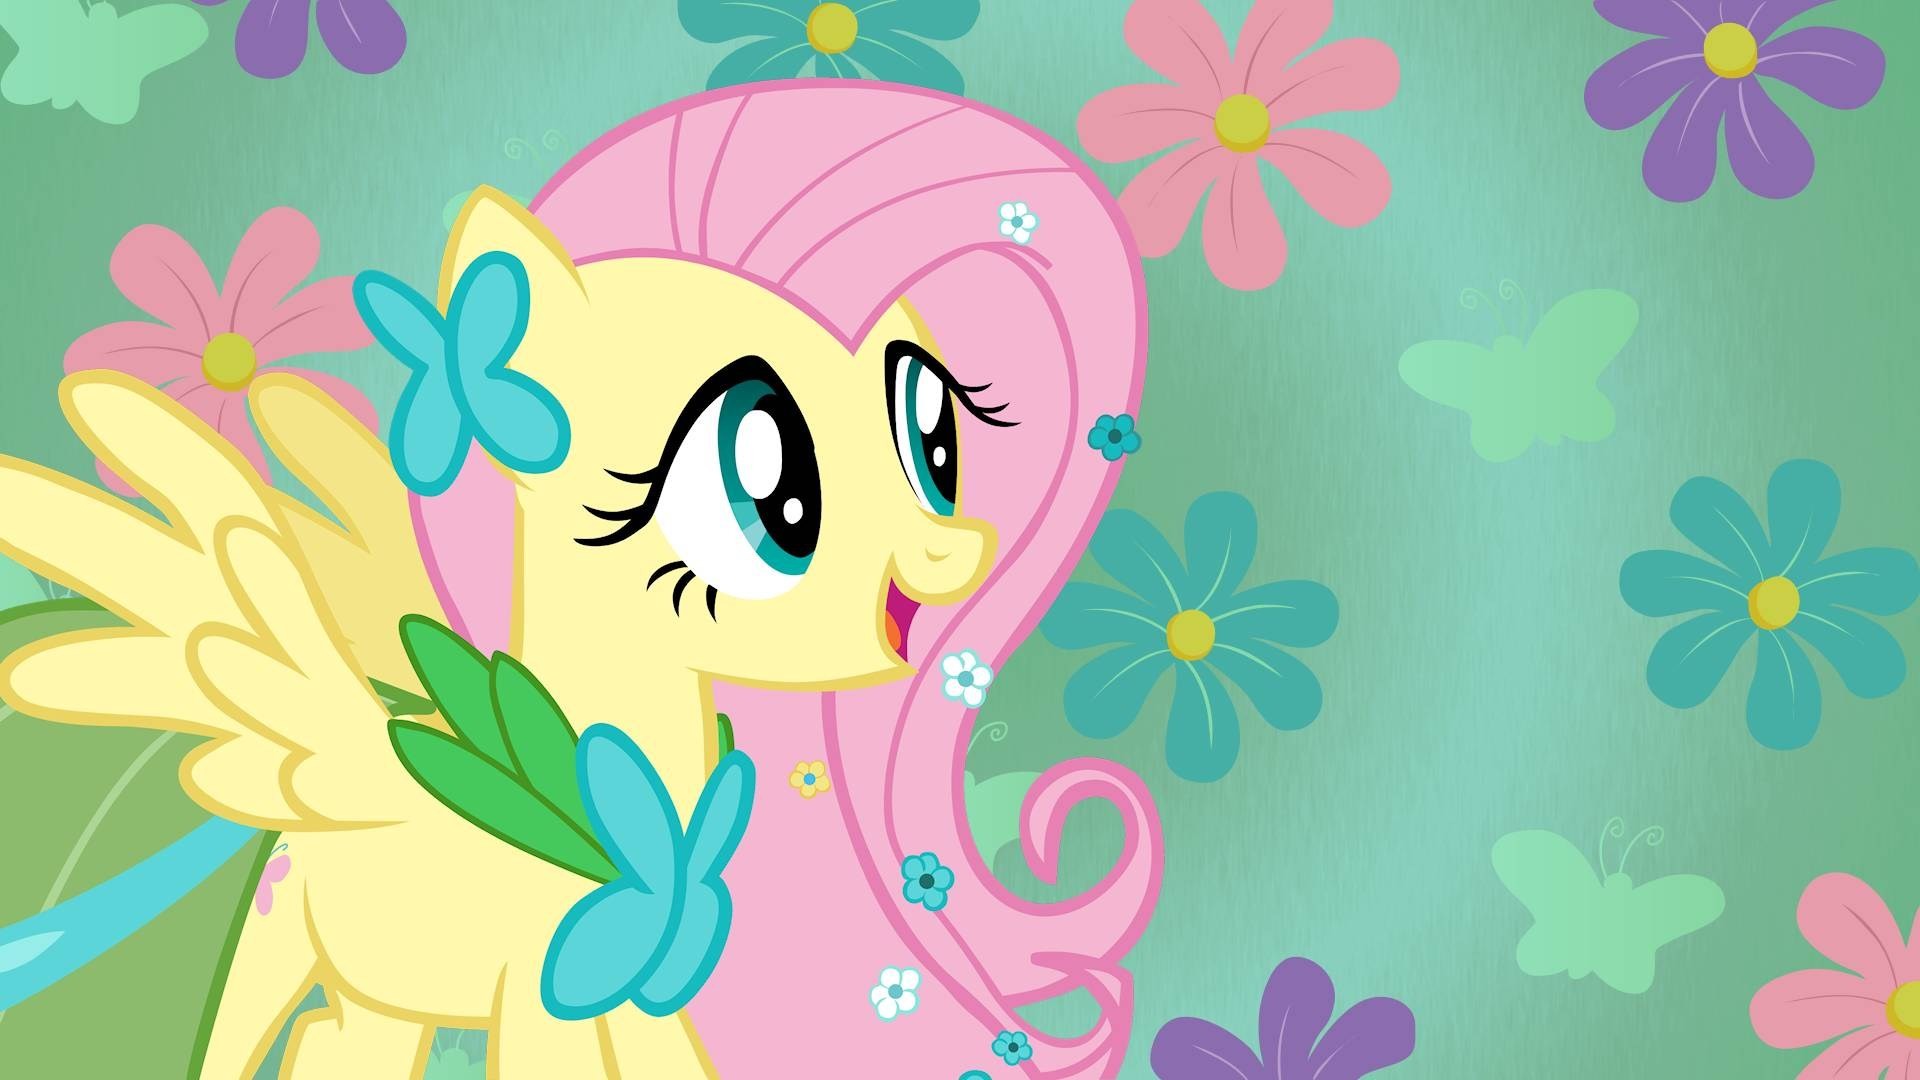 Briley Nail – my little pony wallpaper to download – 1920 x 1080 px